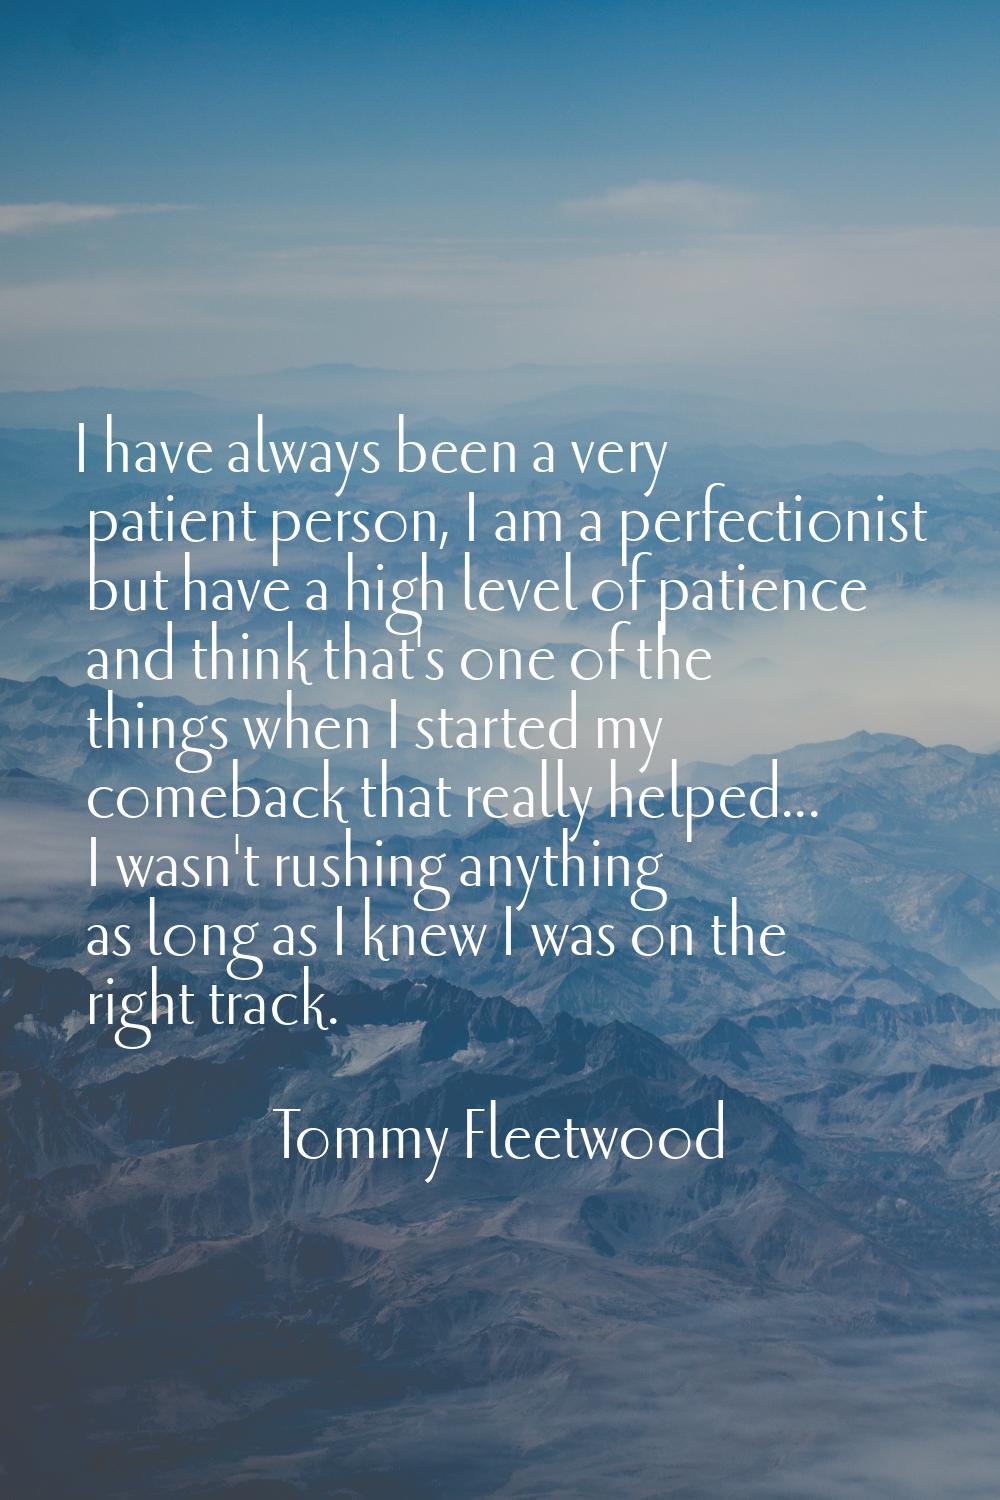 I have always been a very patient person, I am a perfectionist but have a high level of patience an